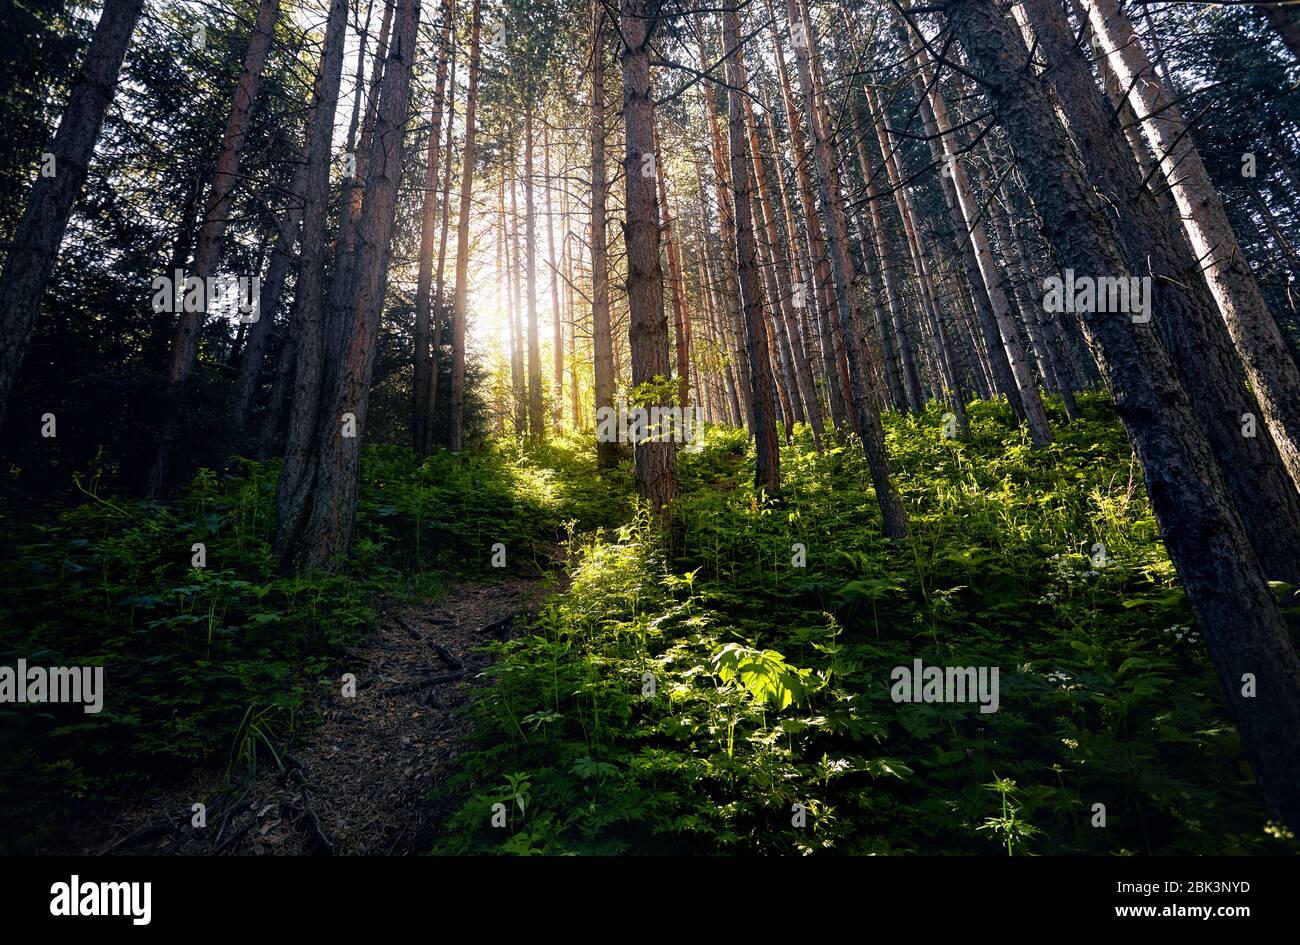 Sunlight glowing through the pine trees in the green forest. Stock Photo